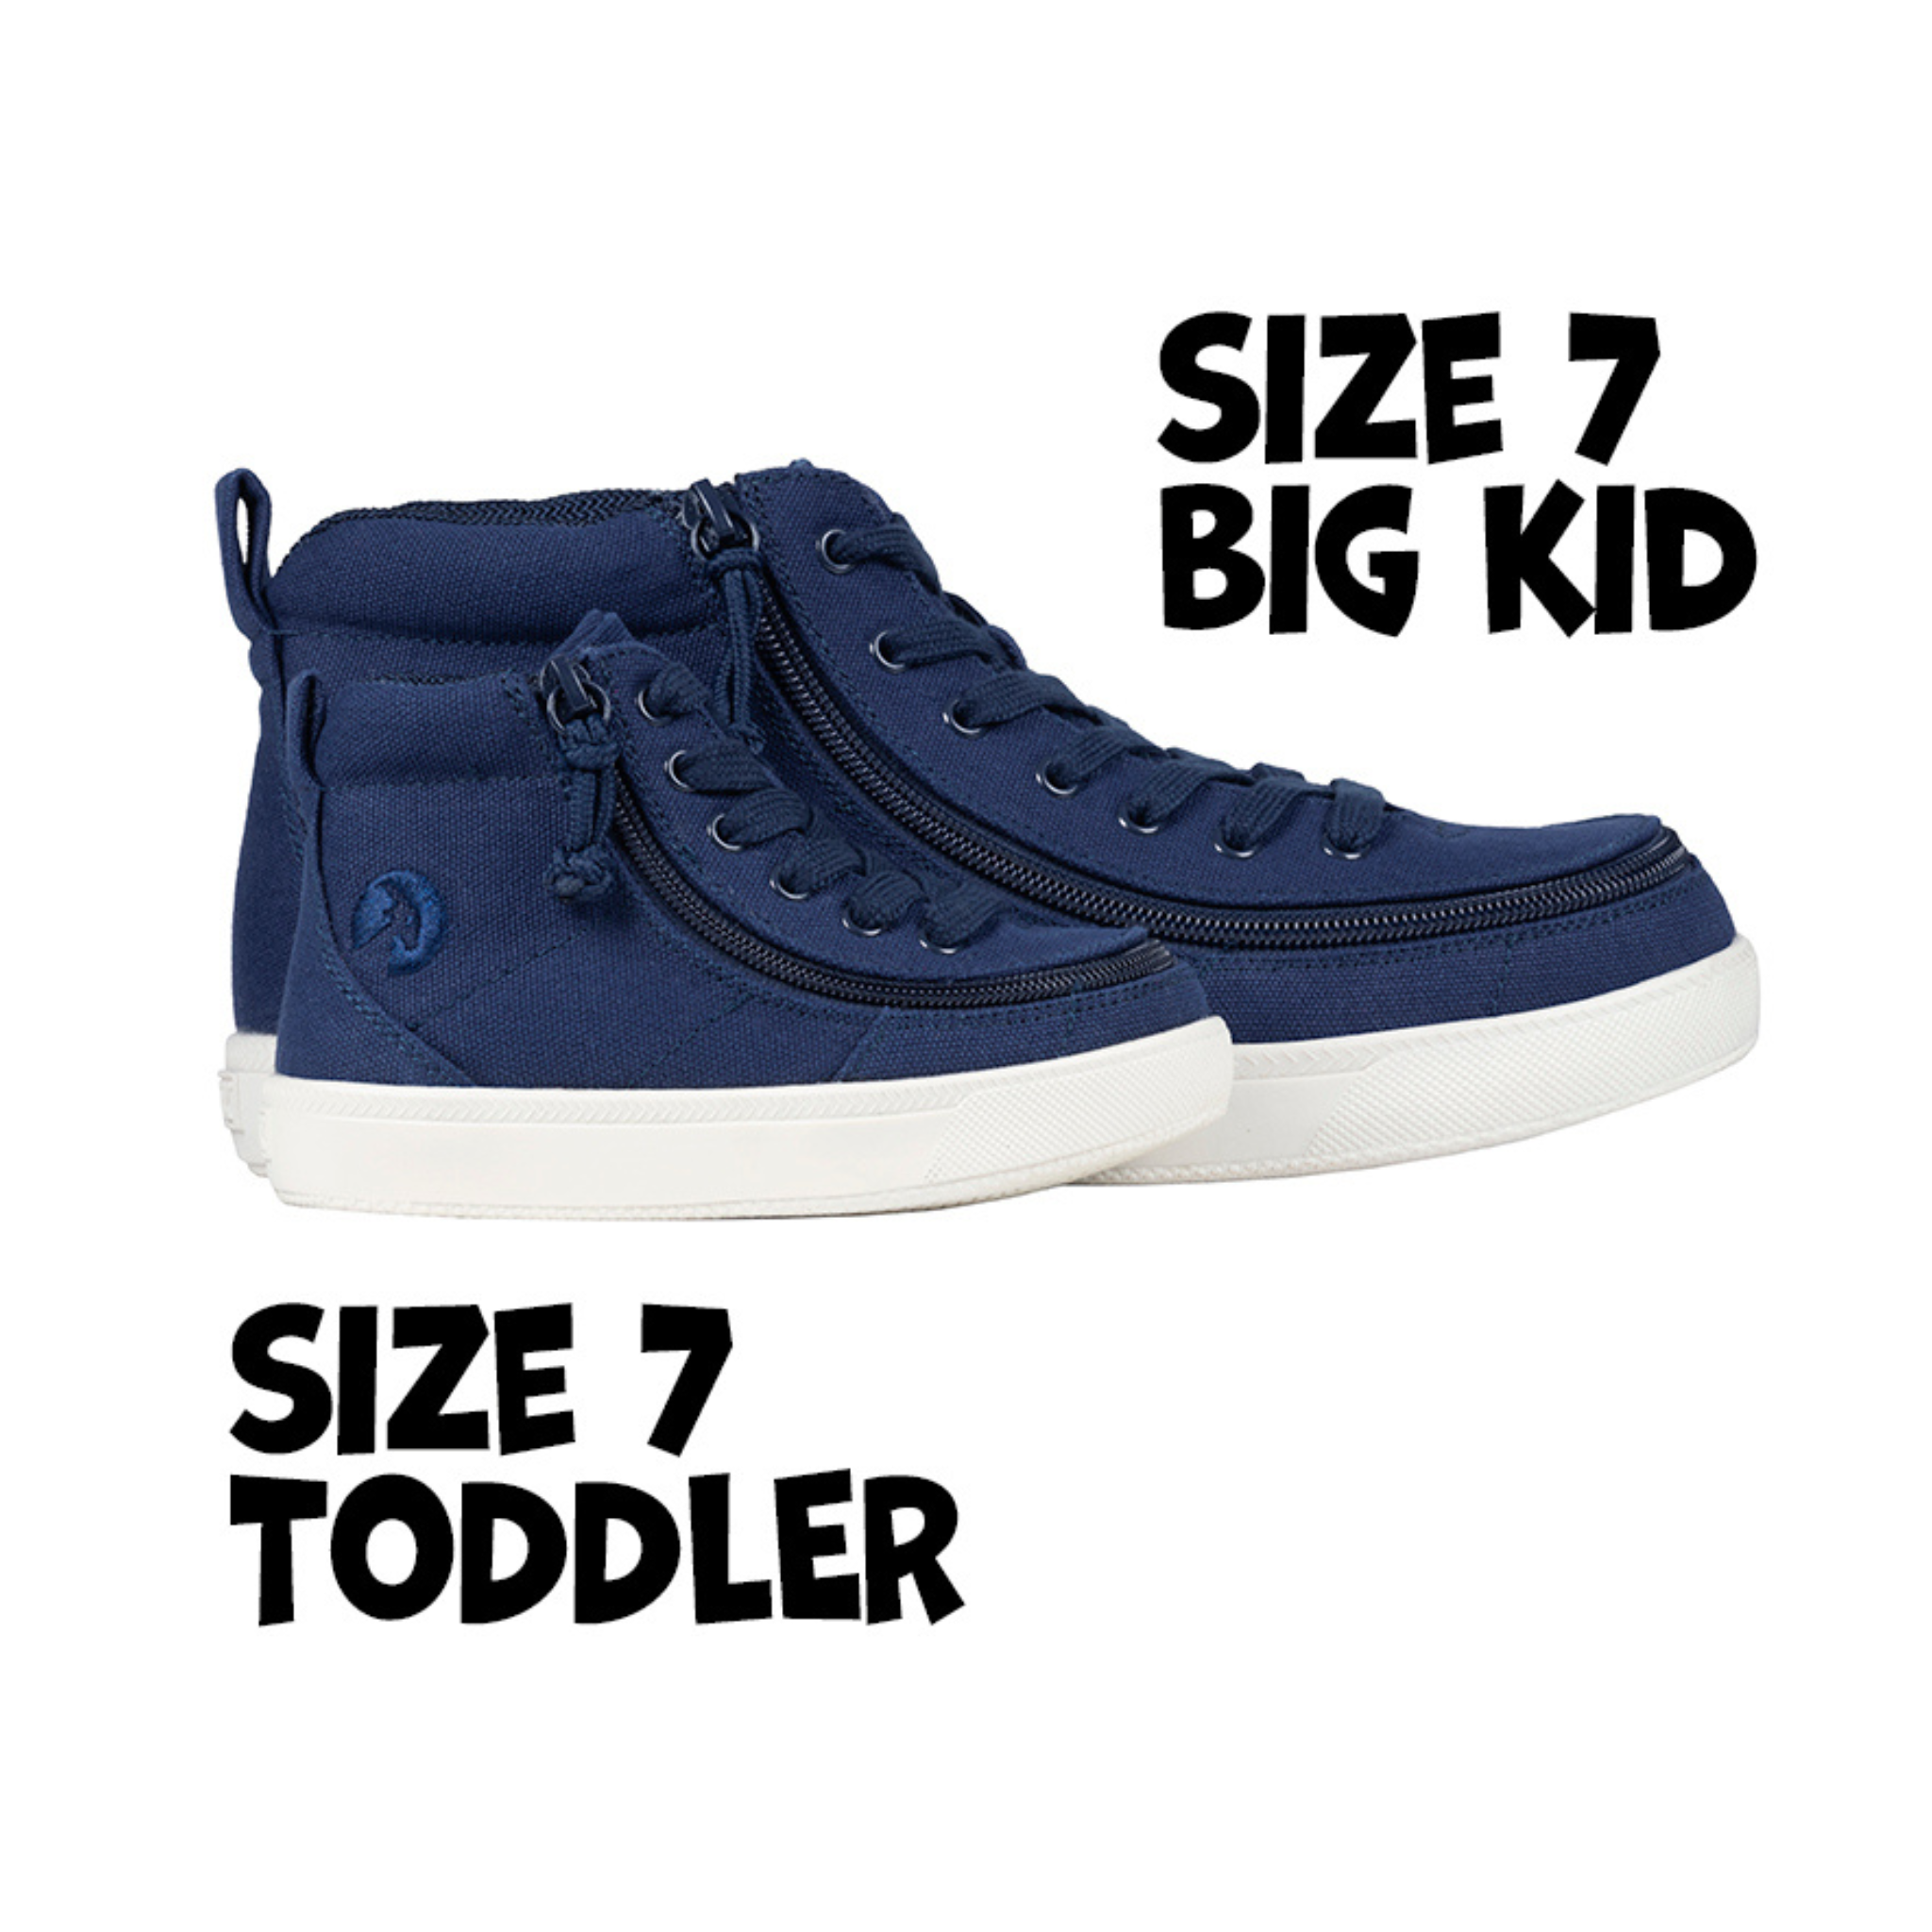 Billy Footwear (Toddlers) DR II Fit - High Top DR II Navy Canvas Shoes